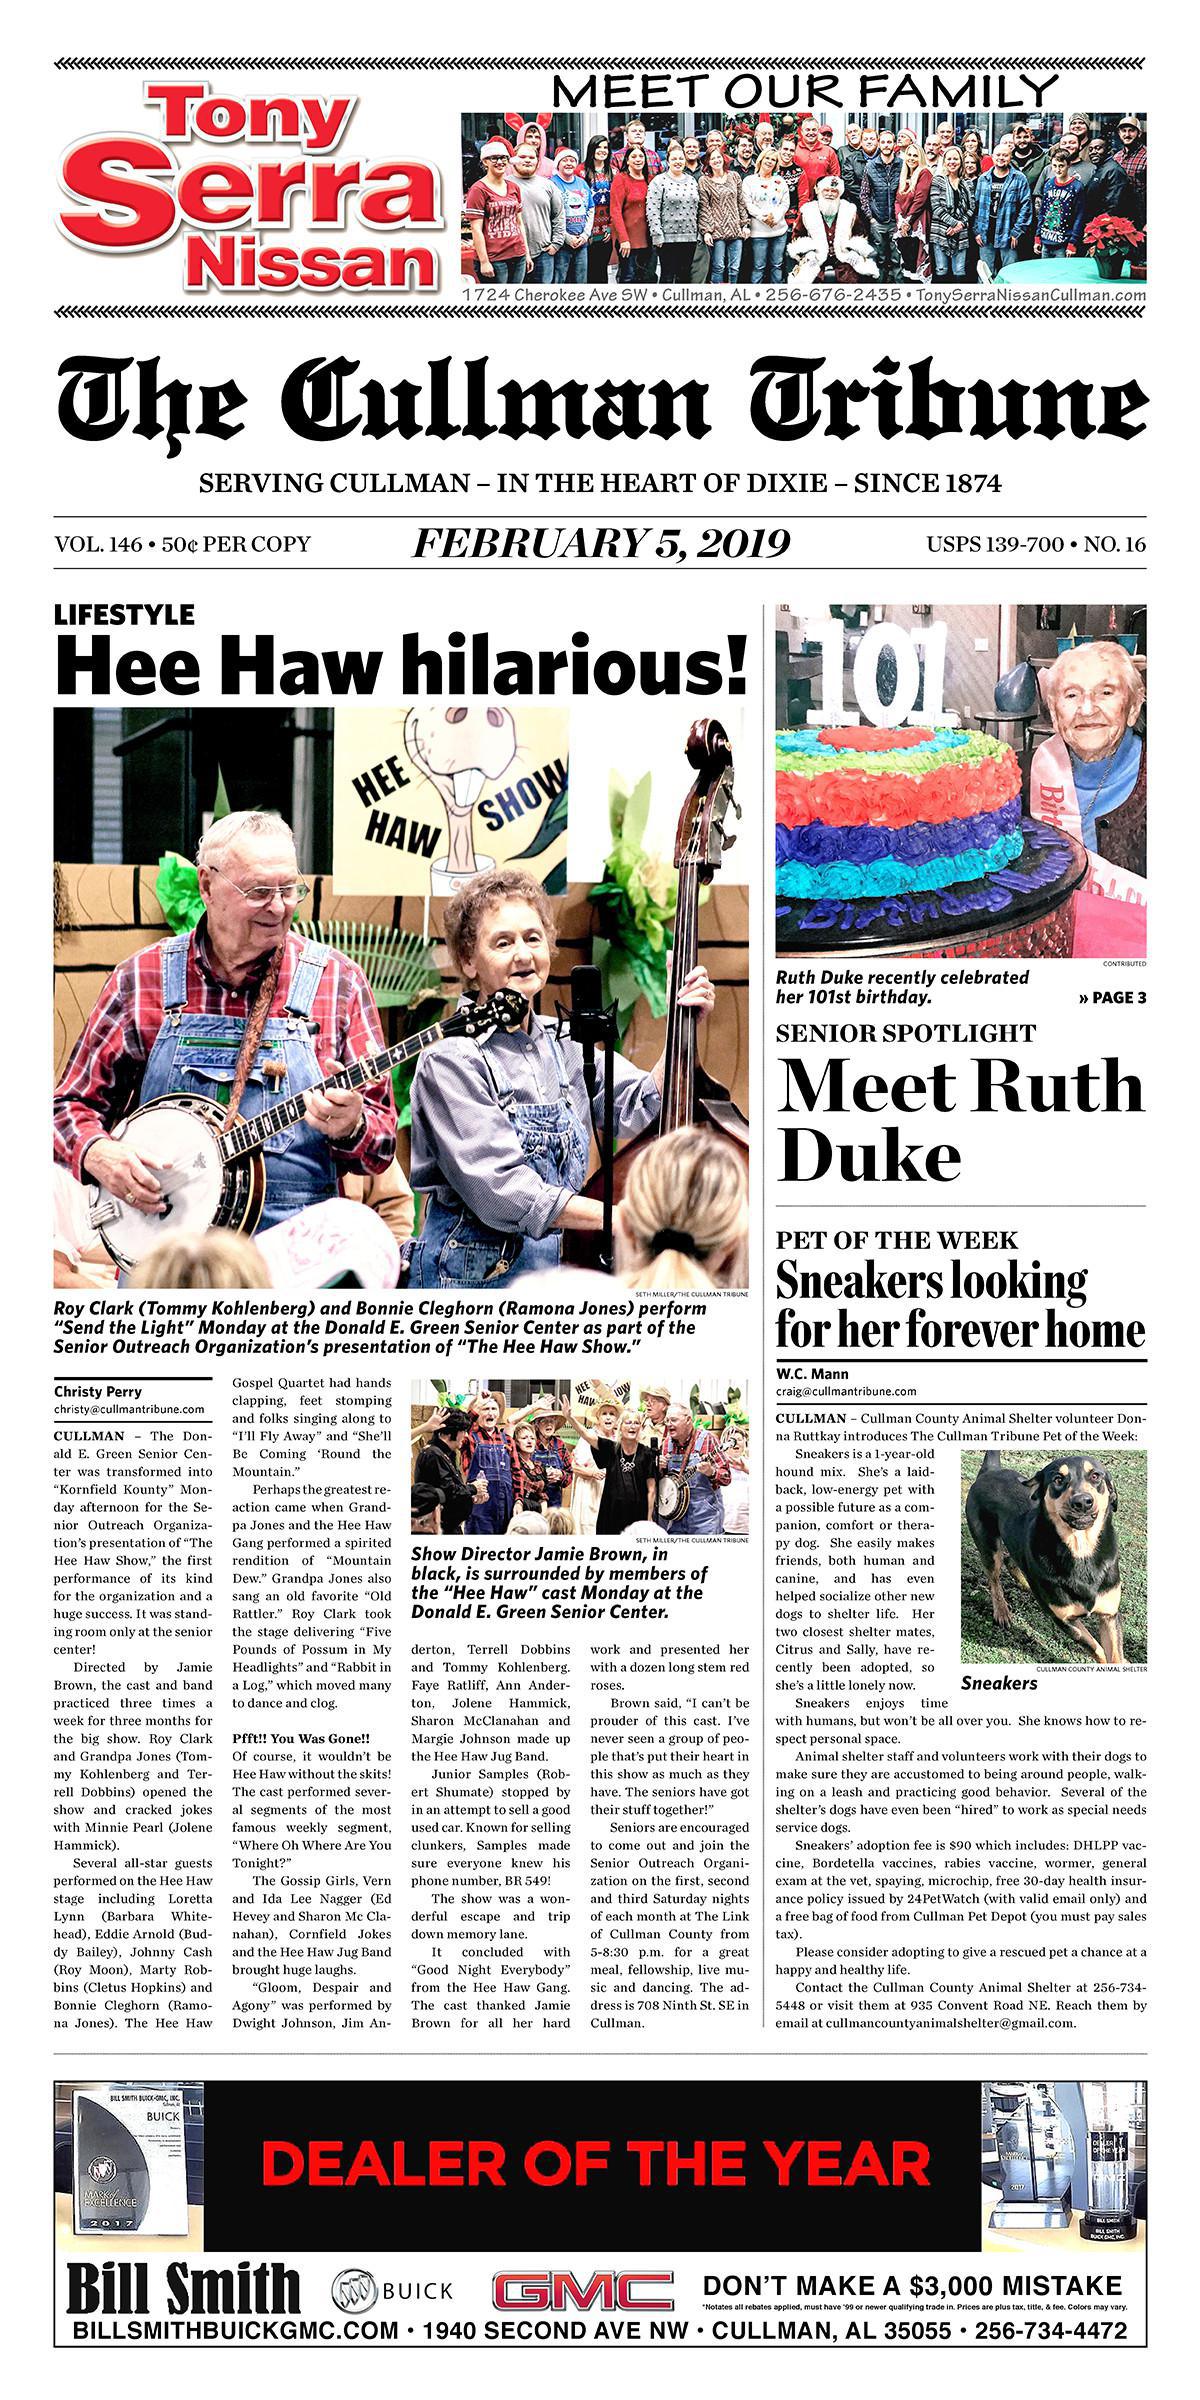 Good Morning Cullman! The 02-05-2019 edition of the Cullman Tribune is now ready to view